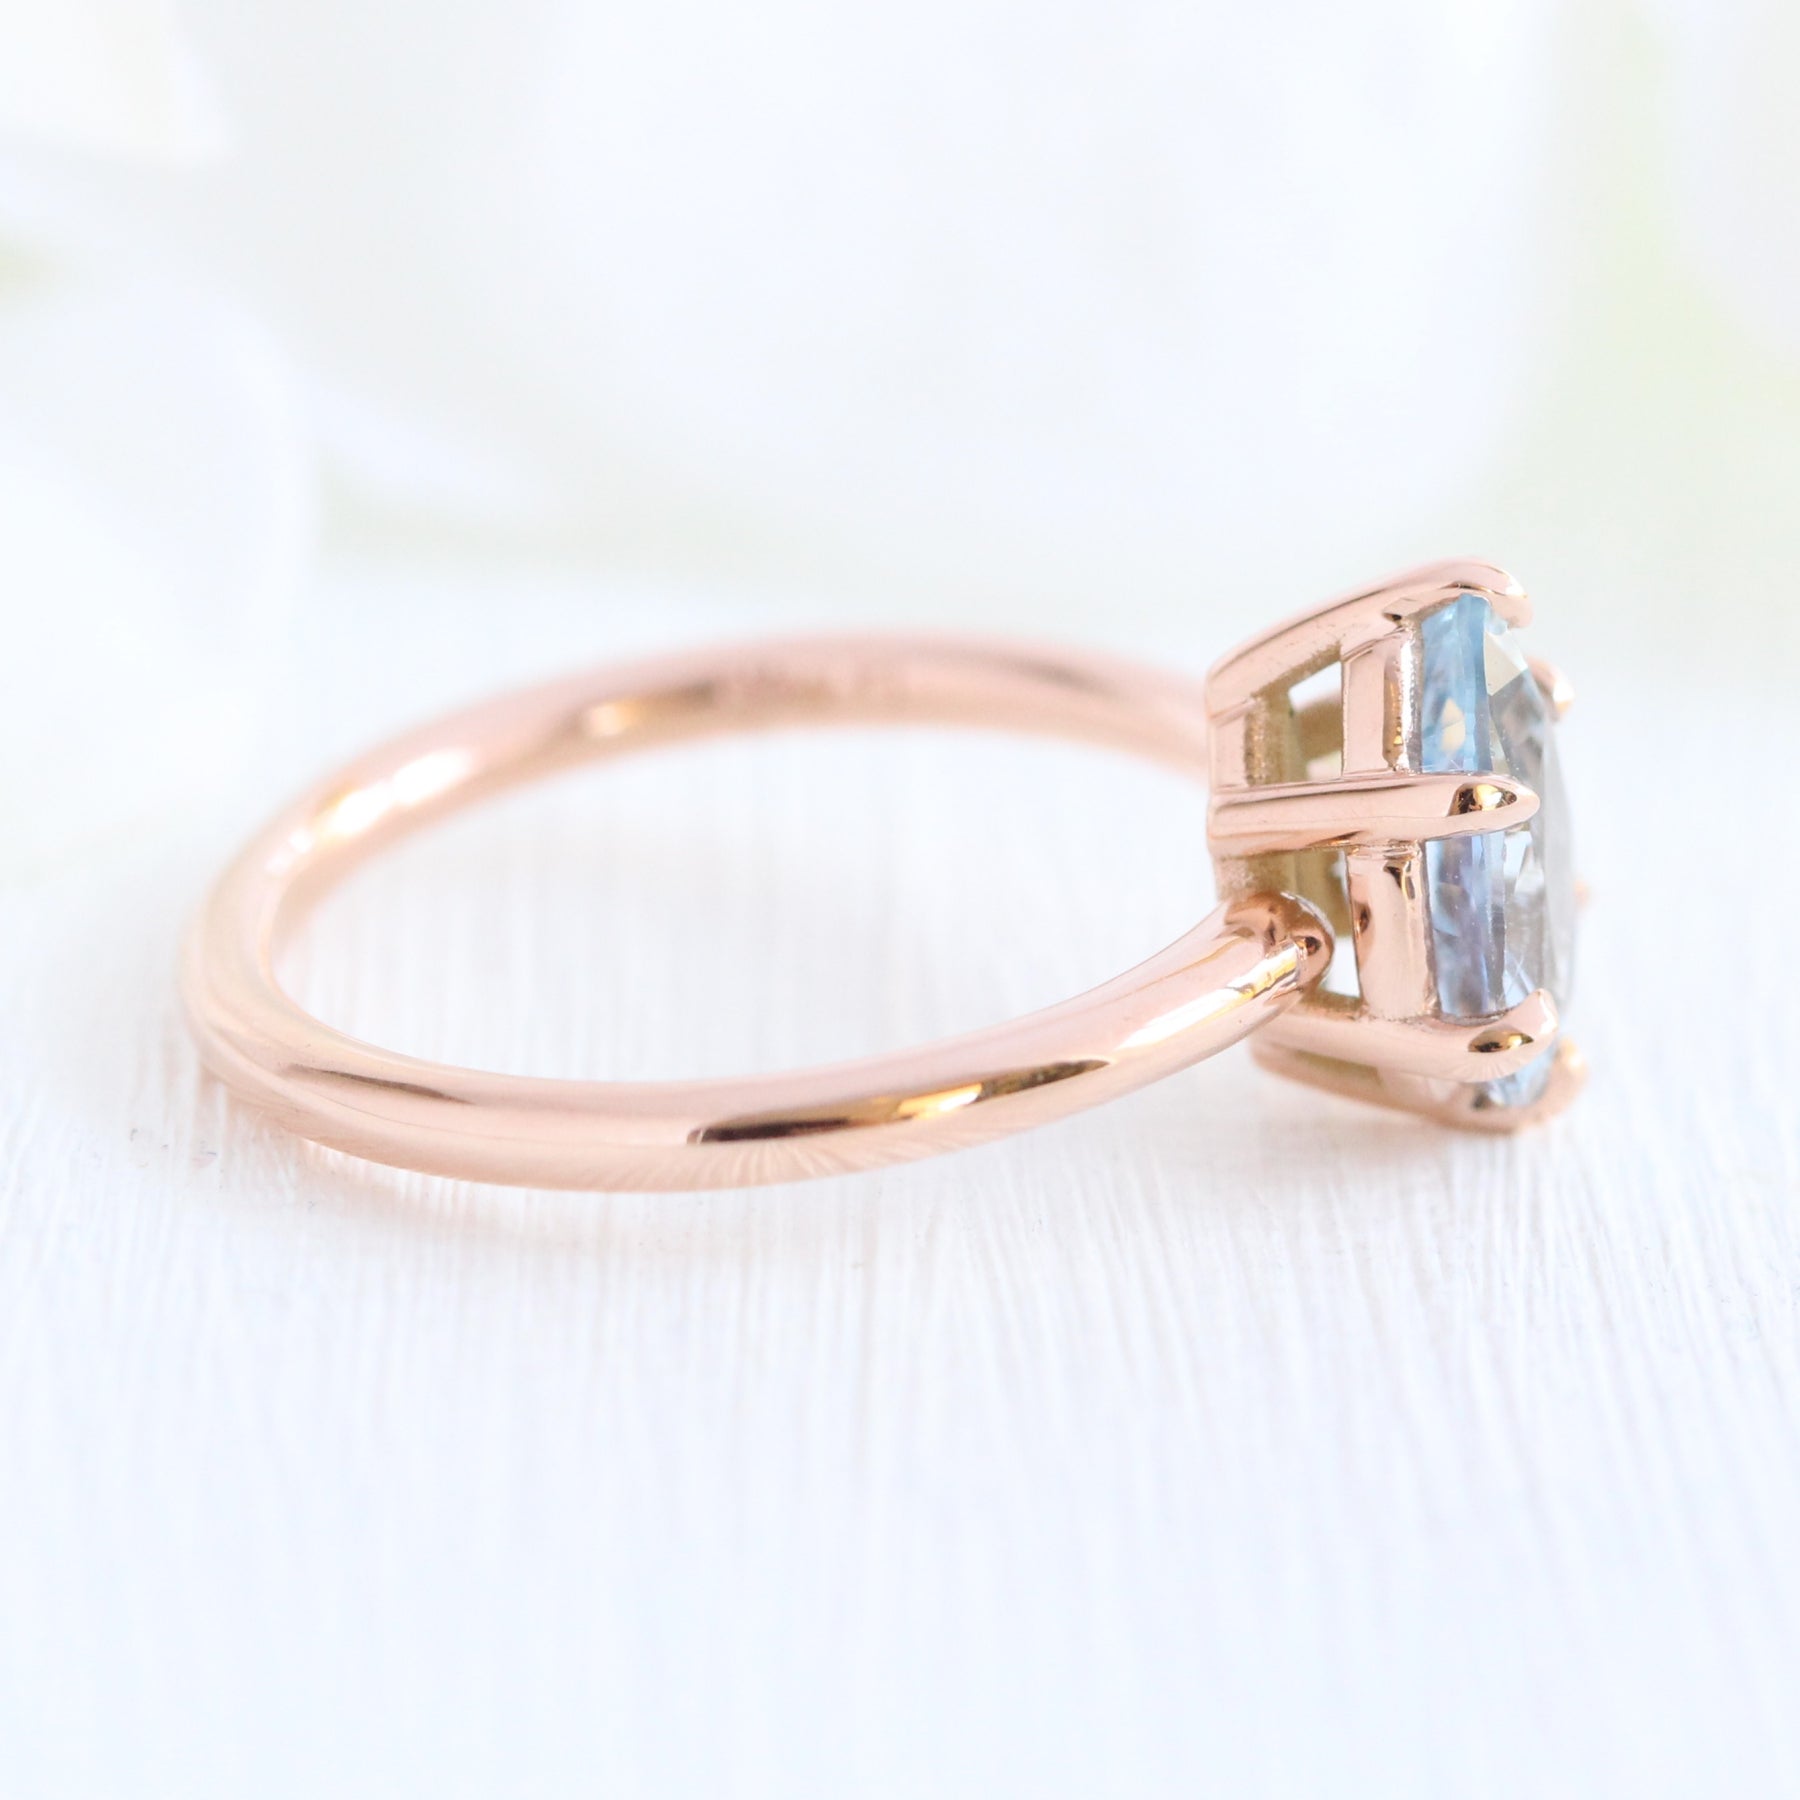 Pear aqua blue sapphire engagement ring rose gold low profile solitaire ring la more design jewelry